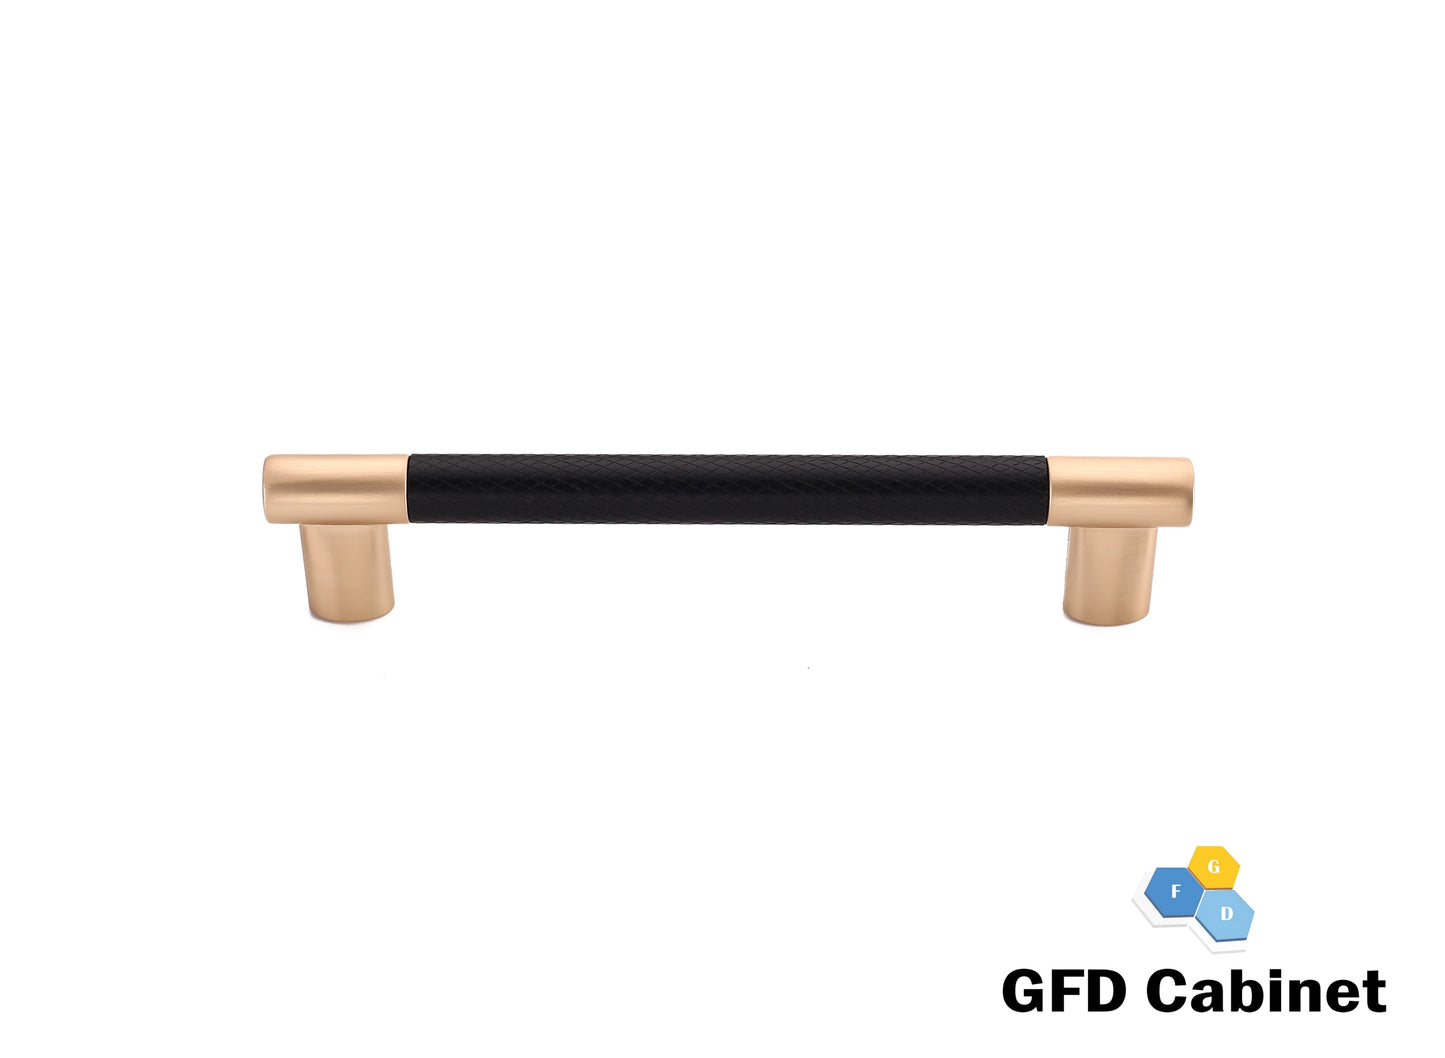 H-4496-96 3-3/4 in. (96 mm) Center-to-Center Cabinet Dual Color T-Bar Pull Handle